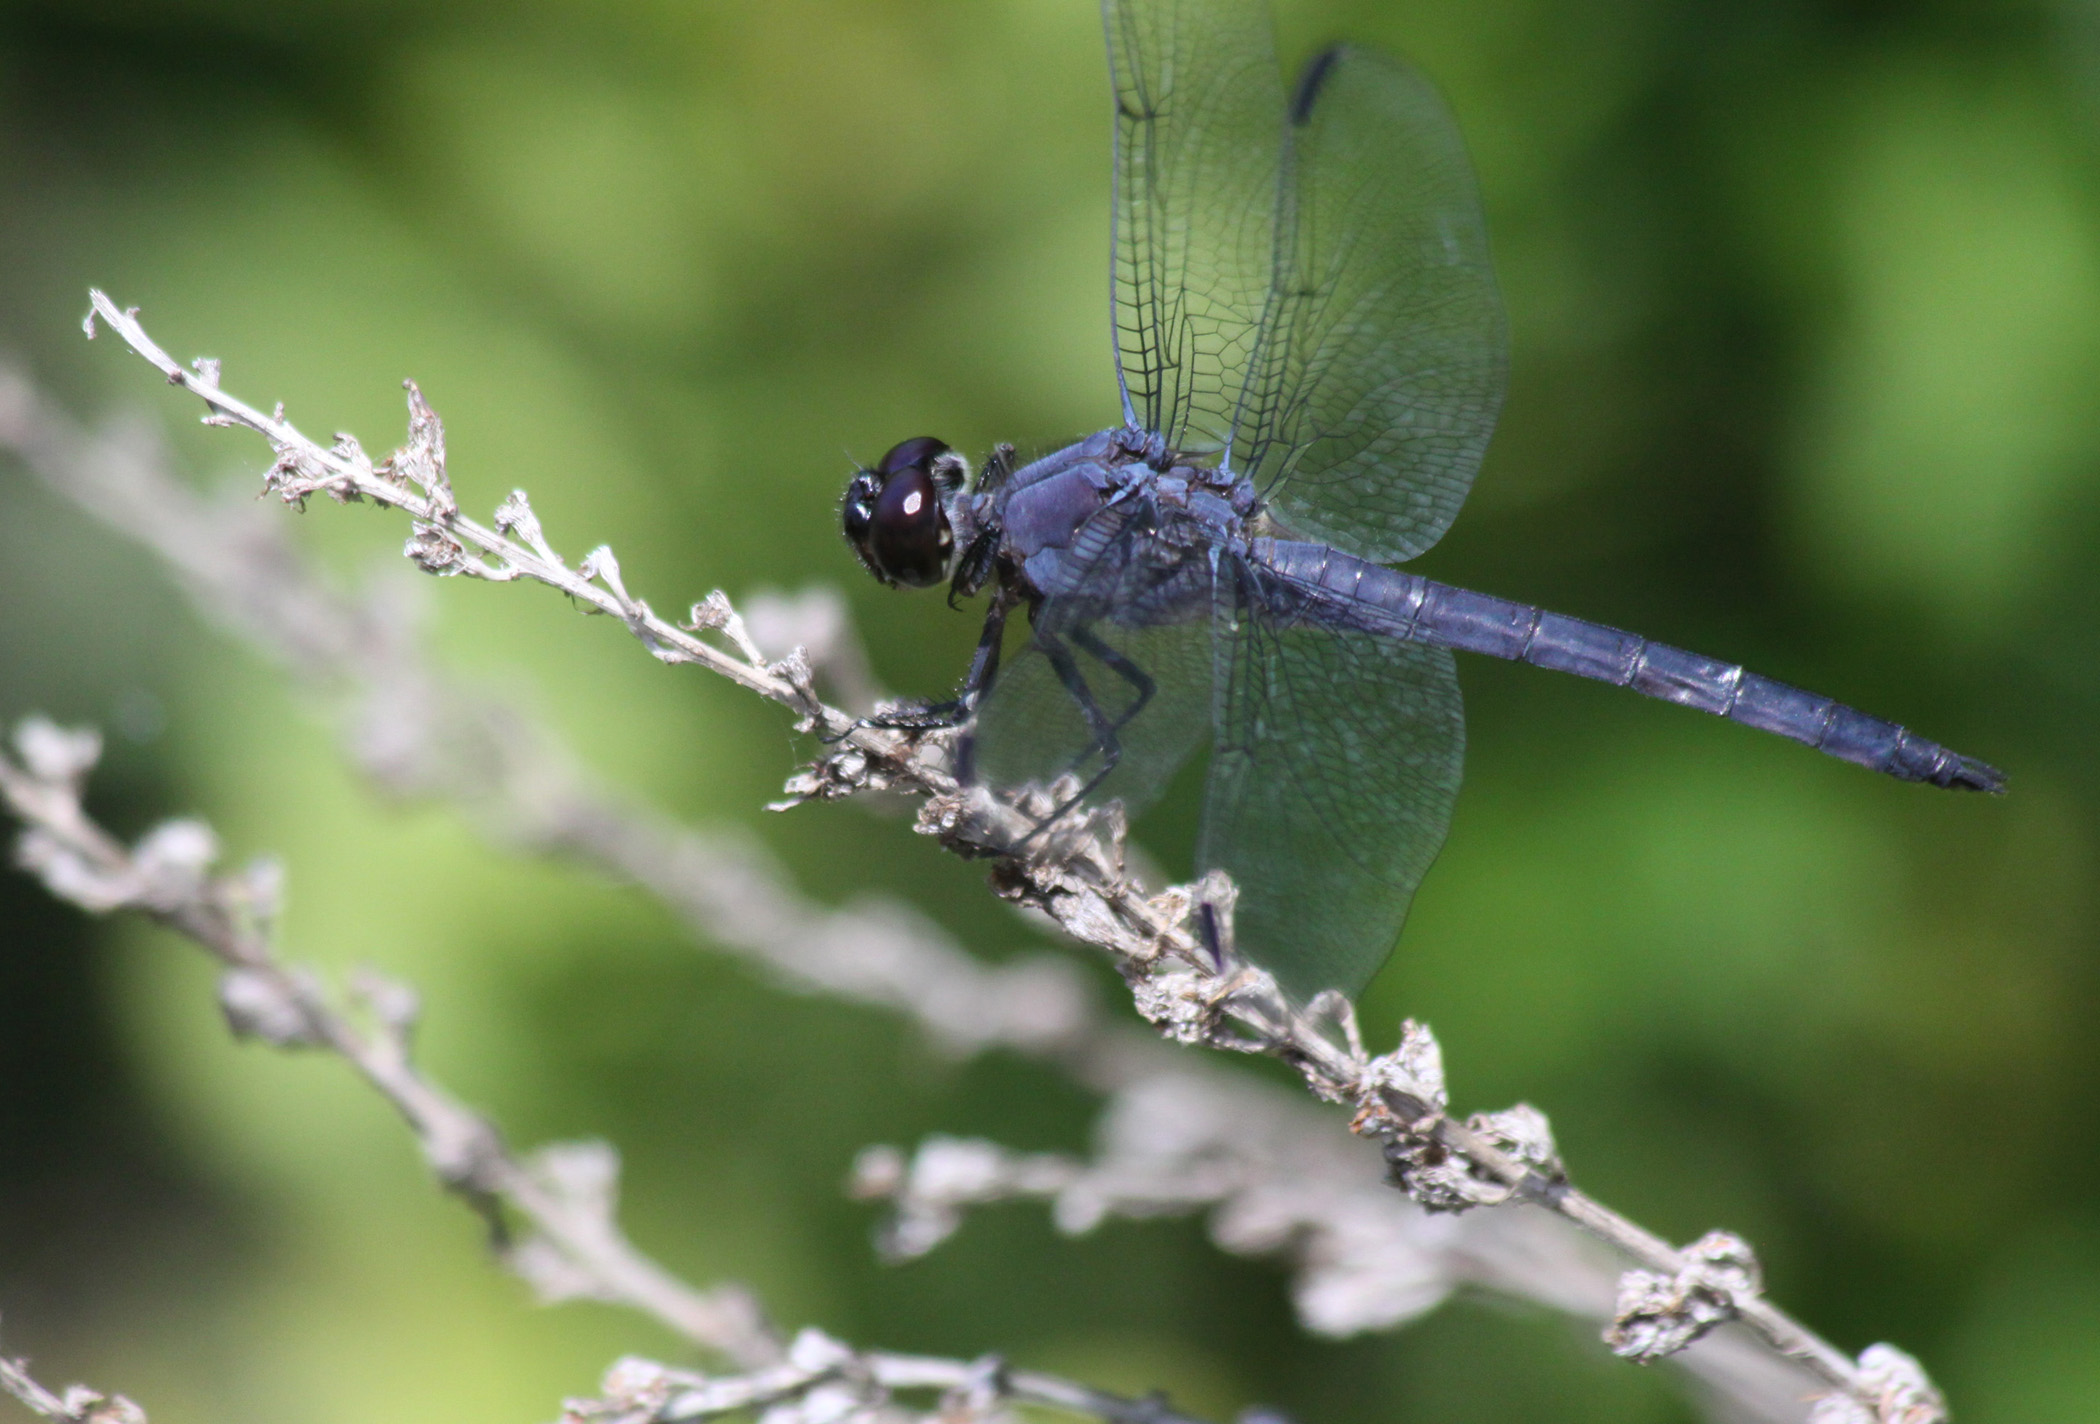 Blue Dragonfly (user submitted)